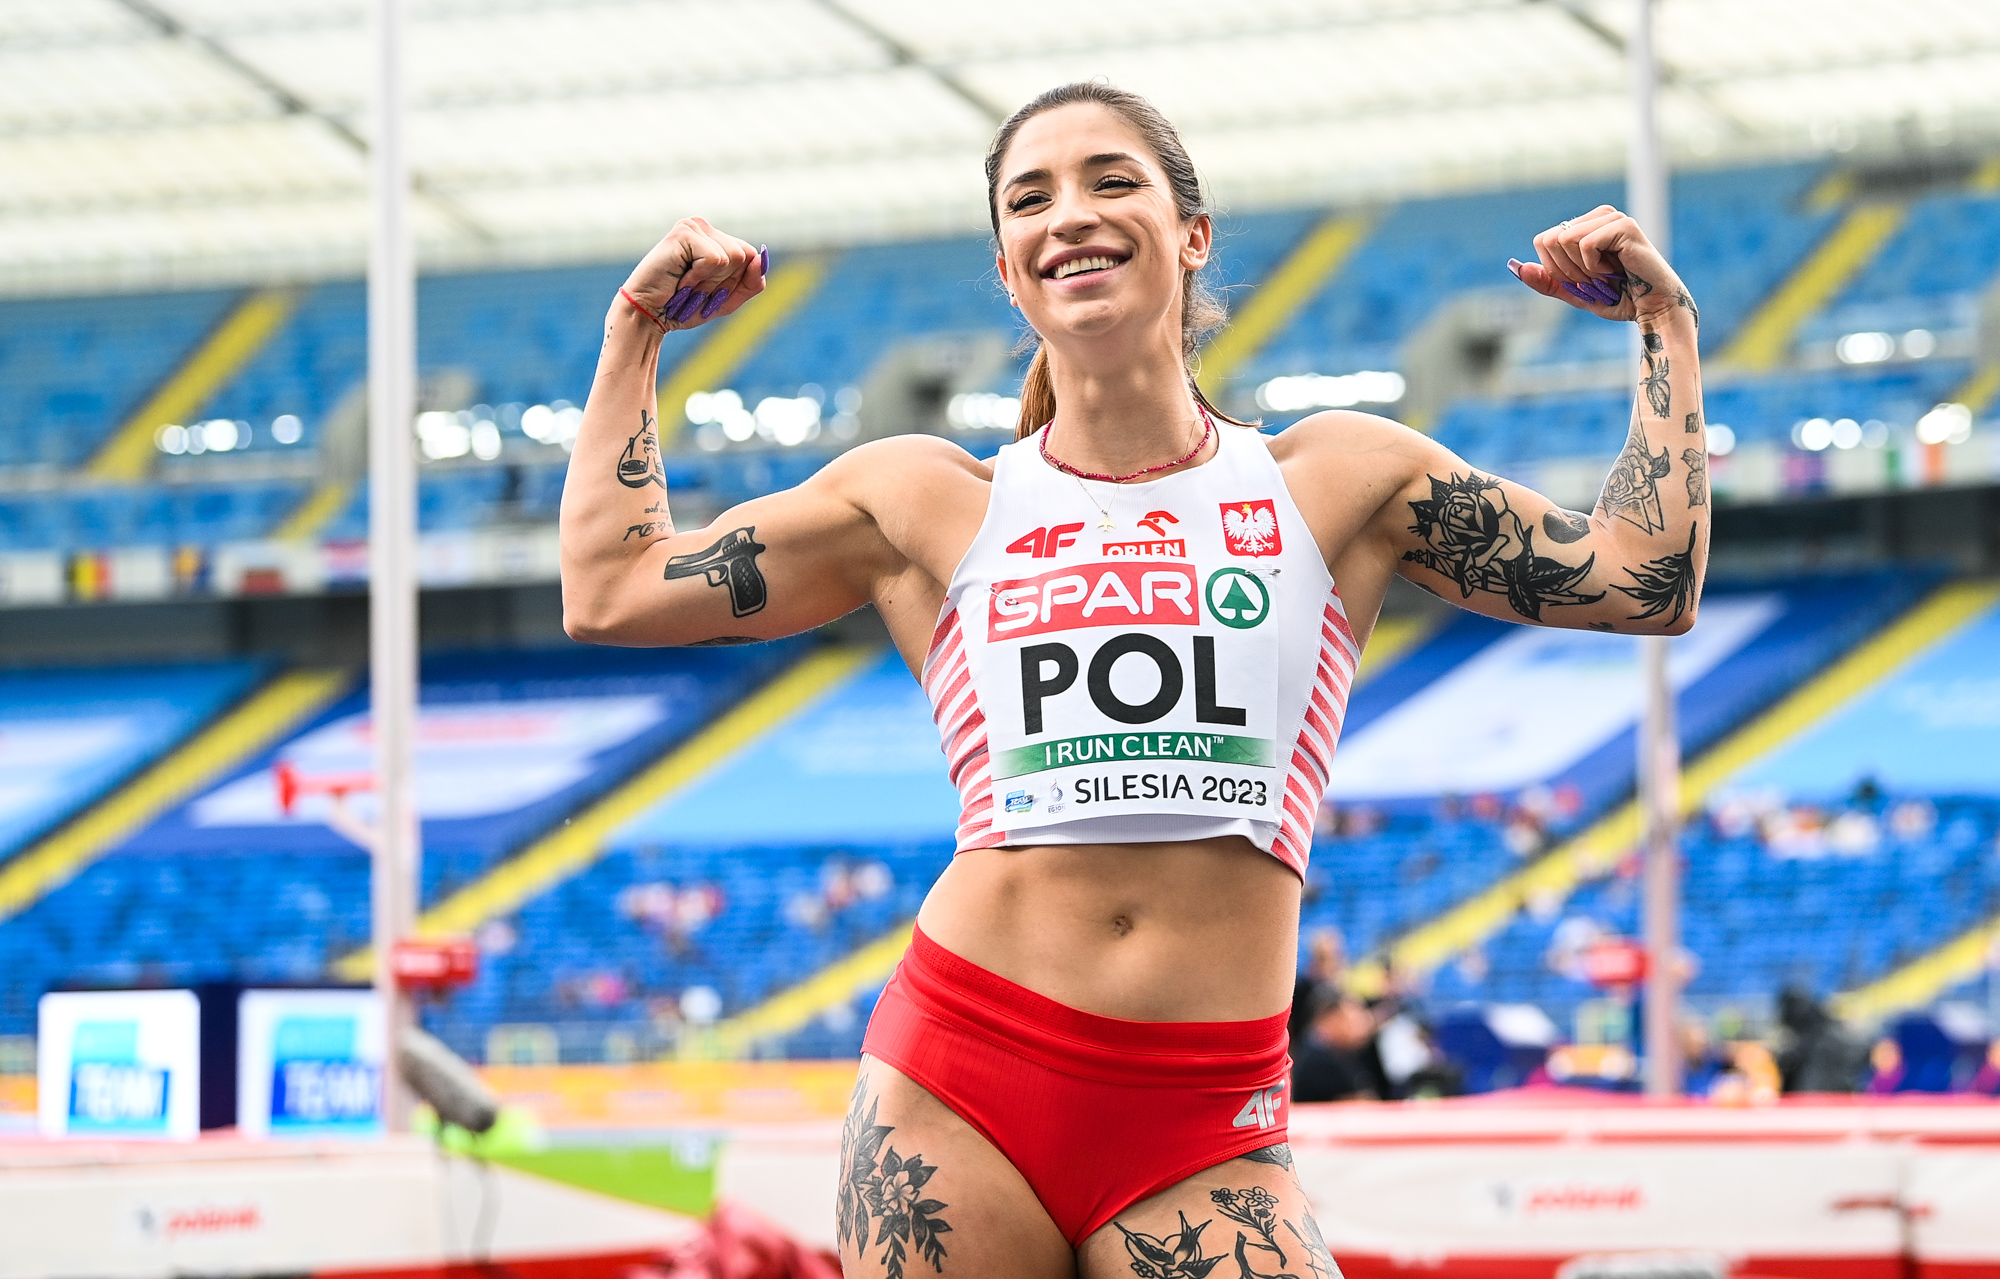 Swoboda and Kaczmarek fast runs. Poland on the podium after the first day of the European Athletics Team Championships Silesia 2023